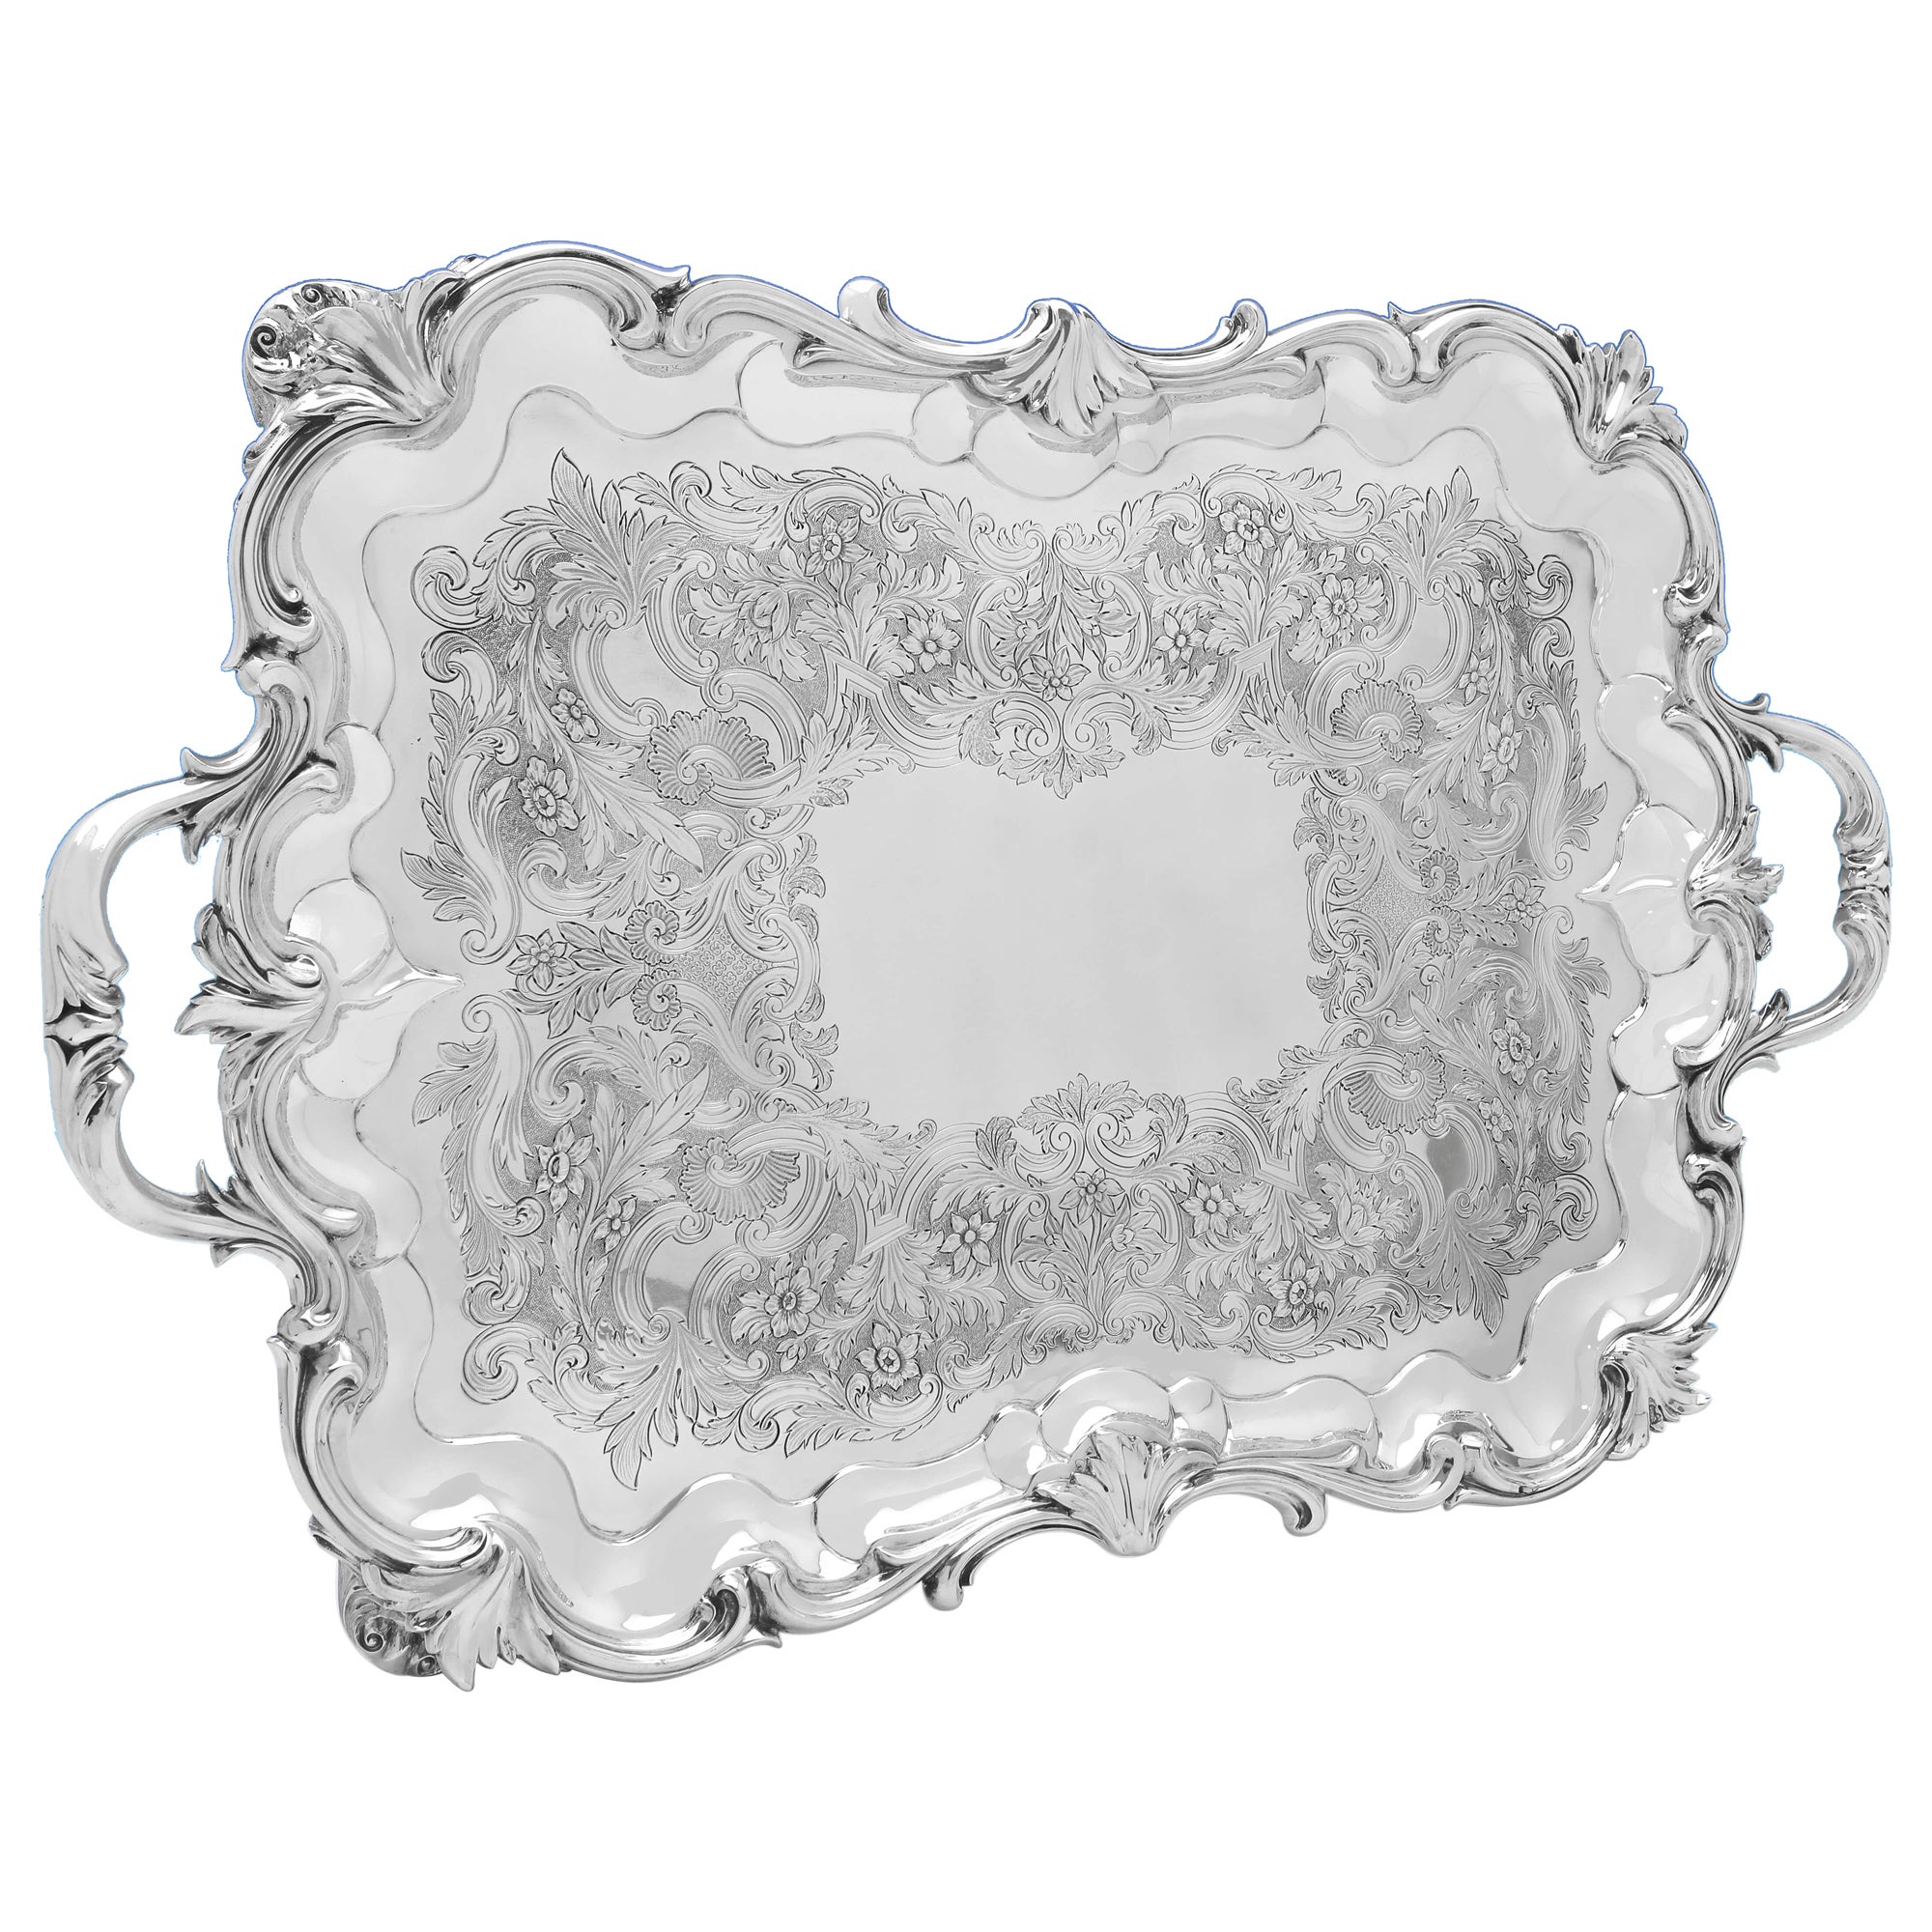 Stunning & Large Victorian Sterling Silver Tray - Barnards 1838 For Sale